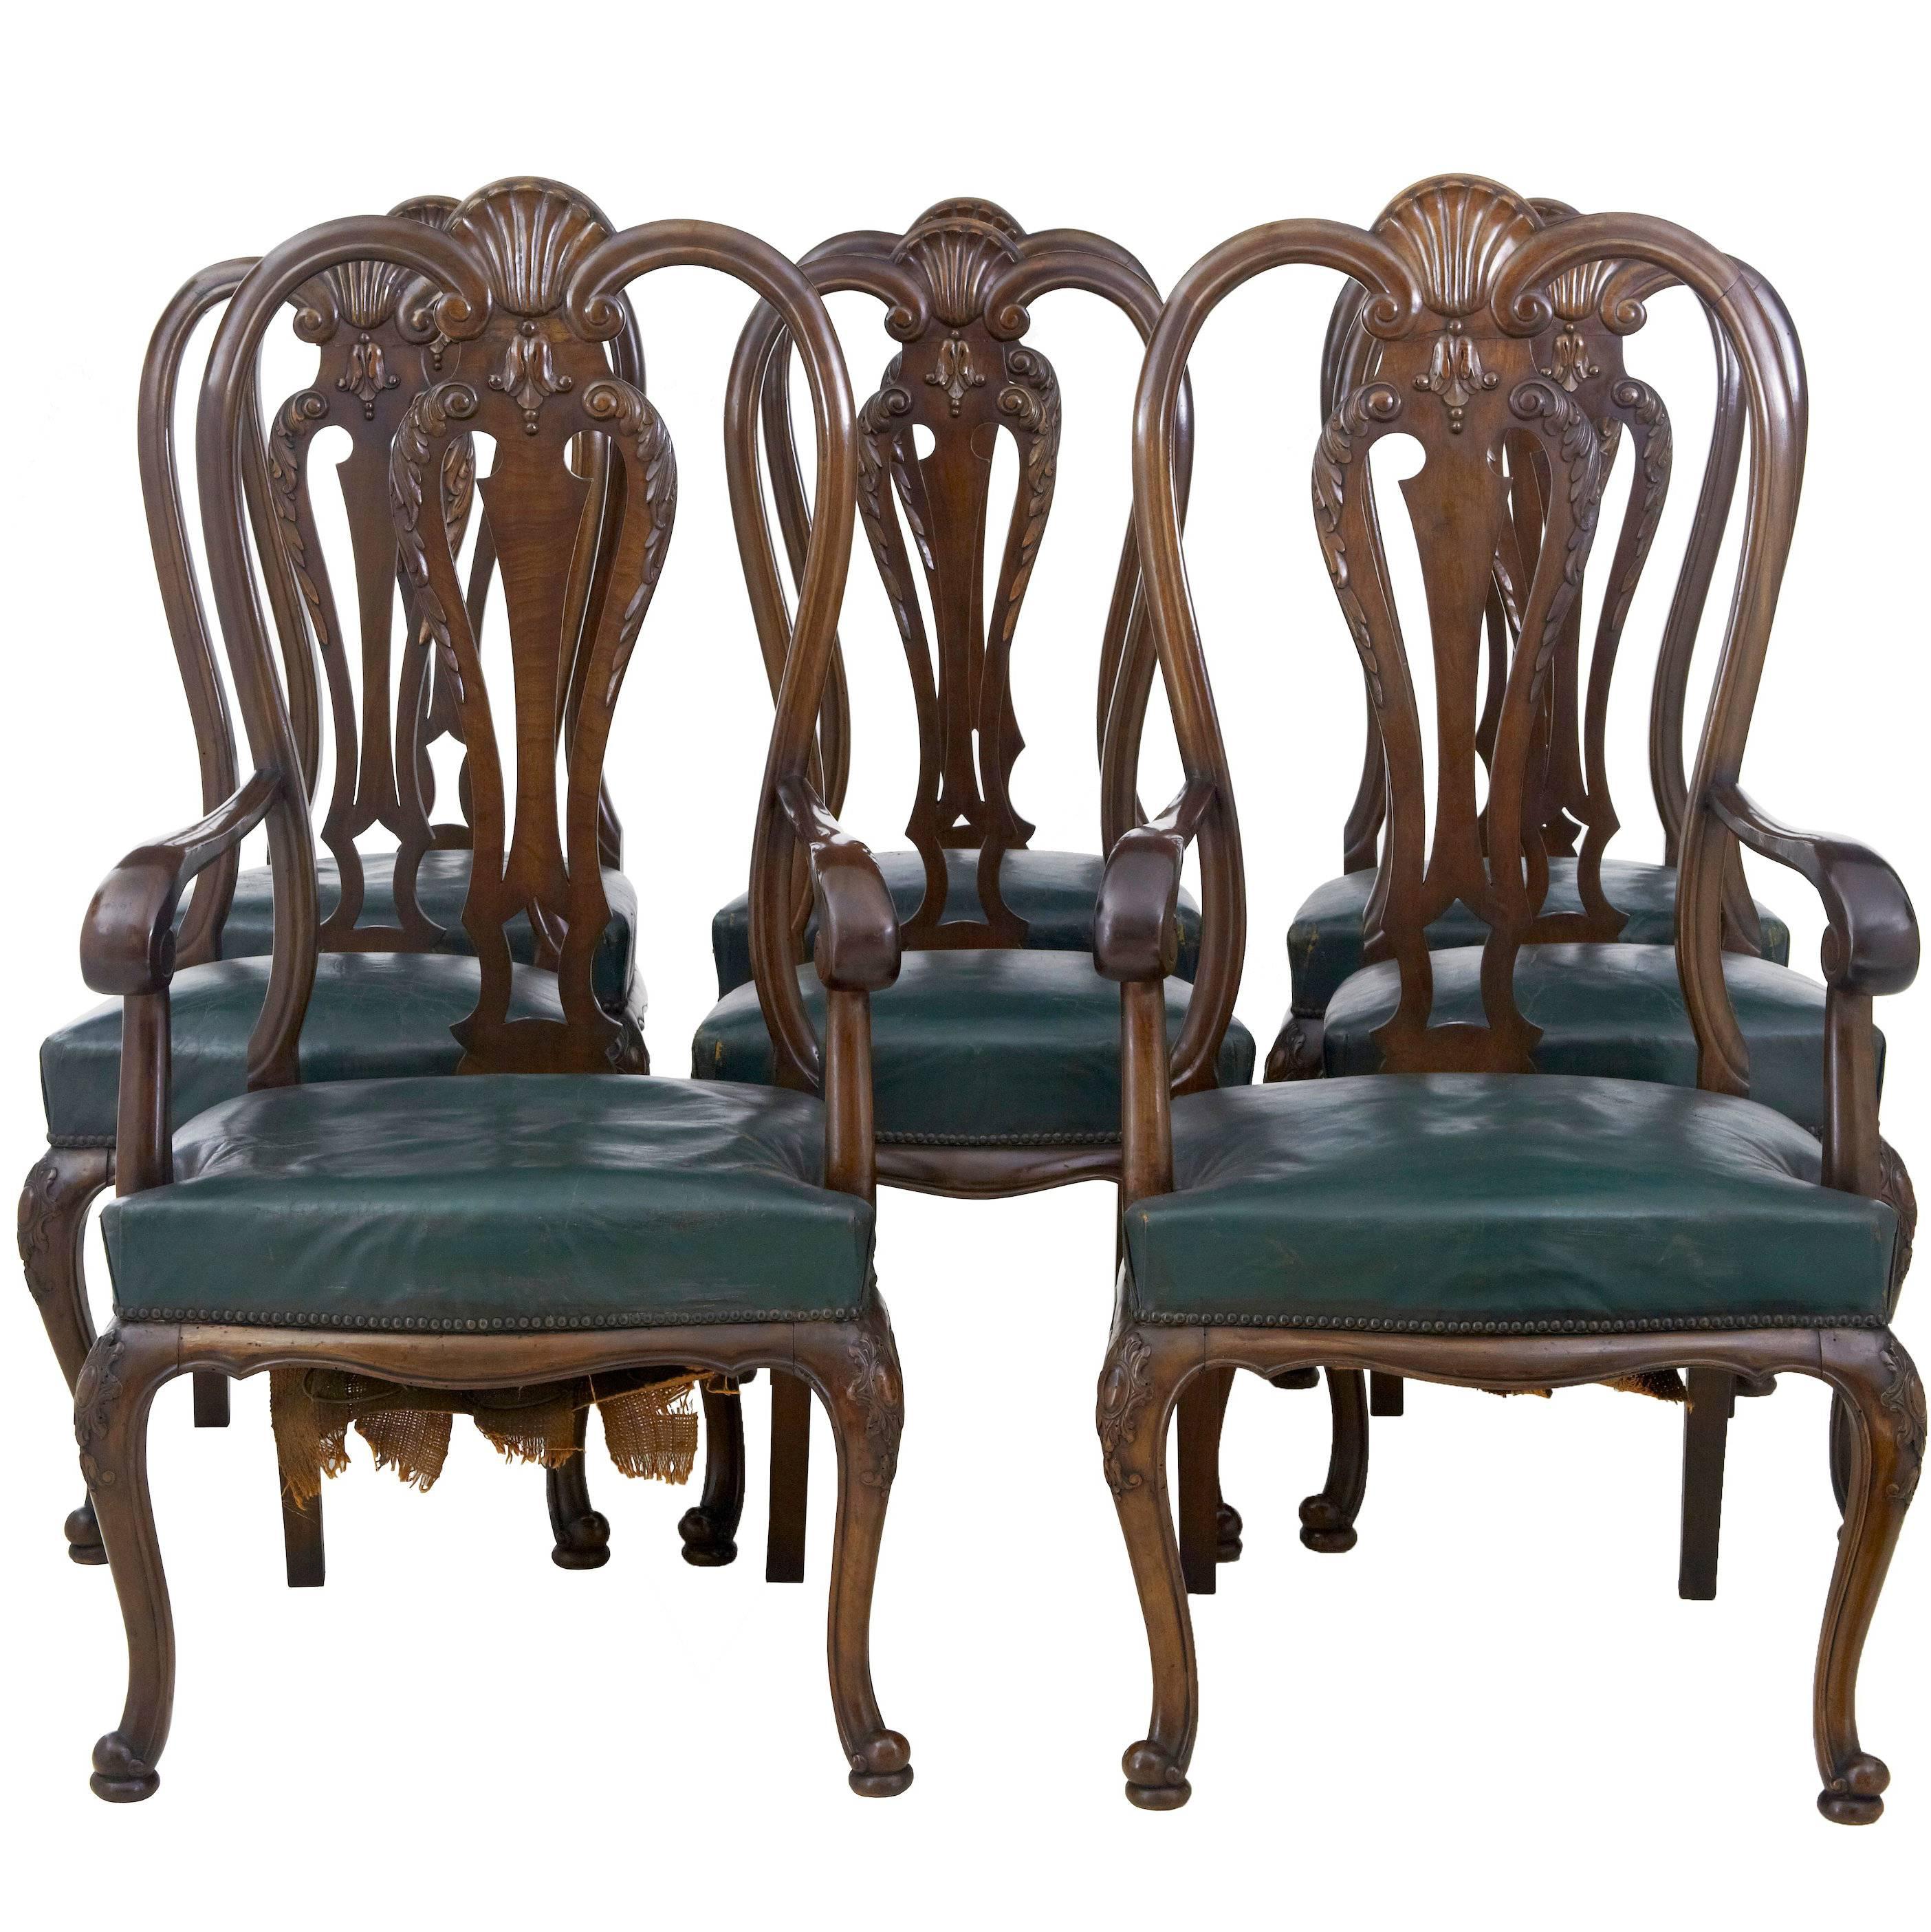 Set of 6+2 Early 20th Century Queen Anne Mahogany Dining Chairs